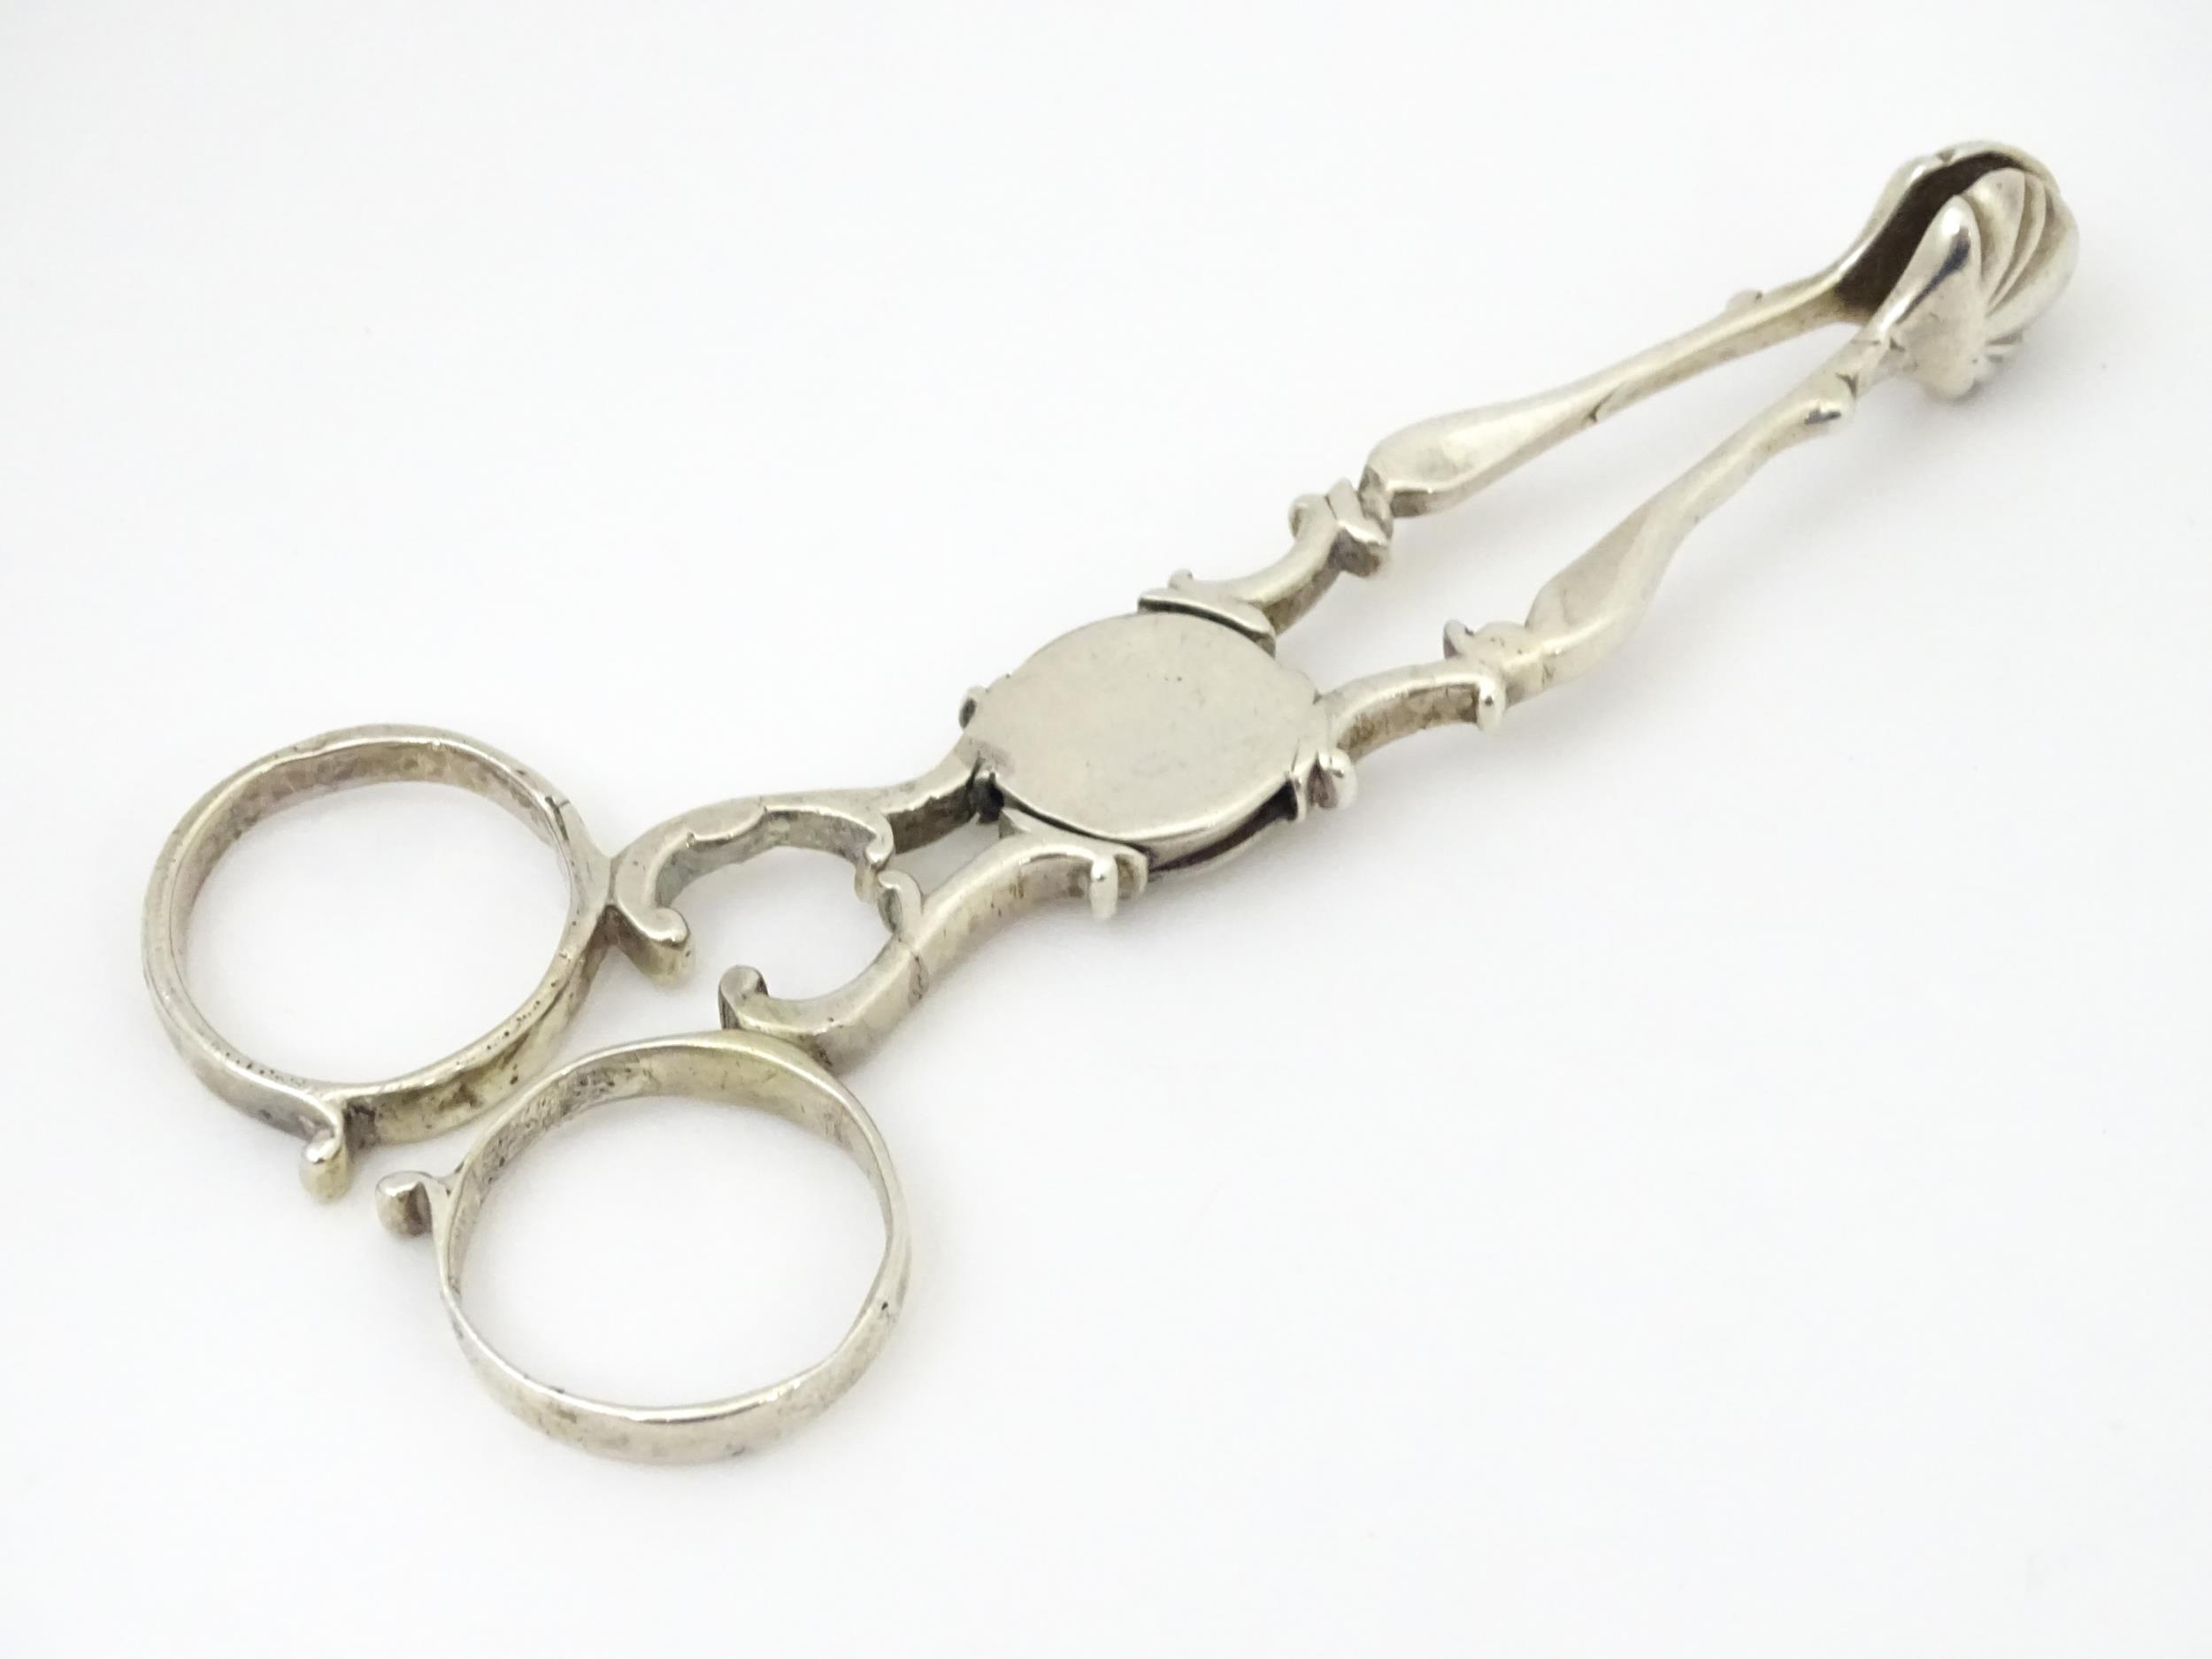 18thC silver sugar nips with shell formed grips. Appprox 4 1/2" long Please Note - we do not make